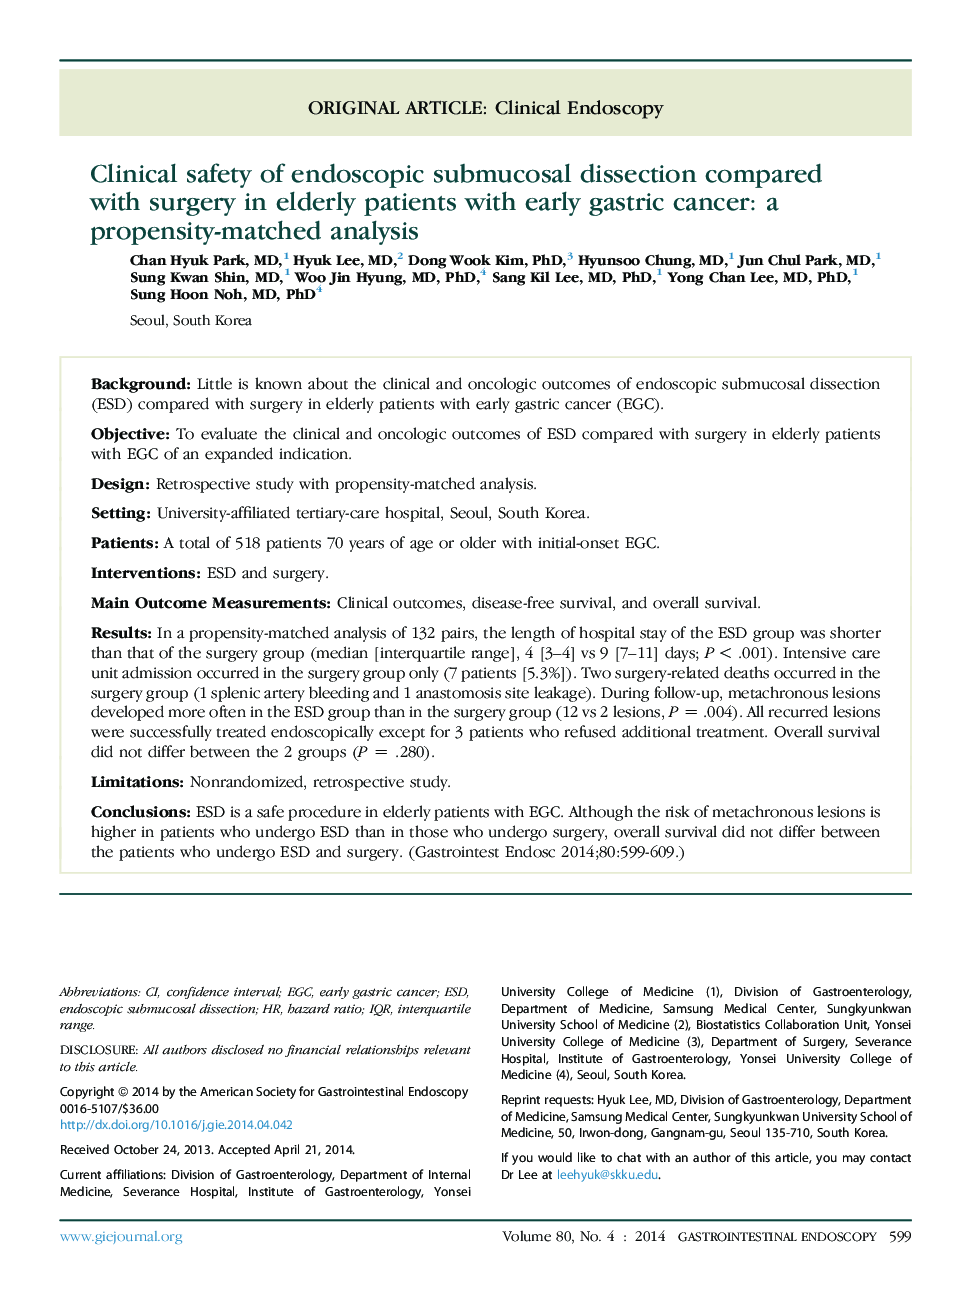 Clinical safety of endoscopic submucosal dissection compared with surgery in elderly patients with early gastric cancer: a propensity-matched analysis 